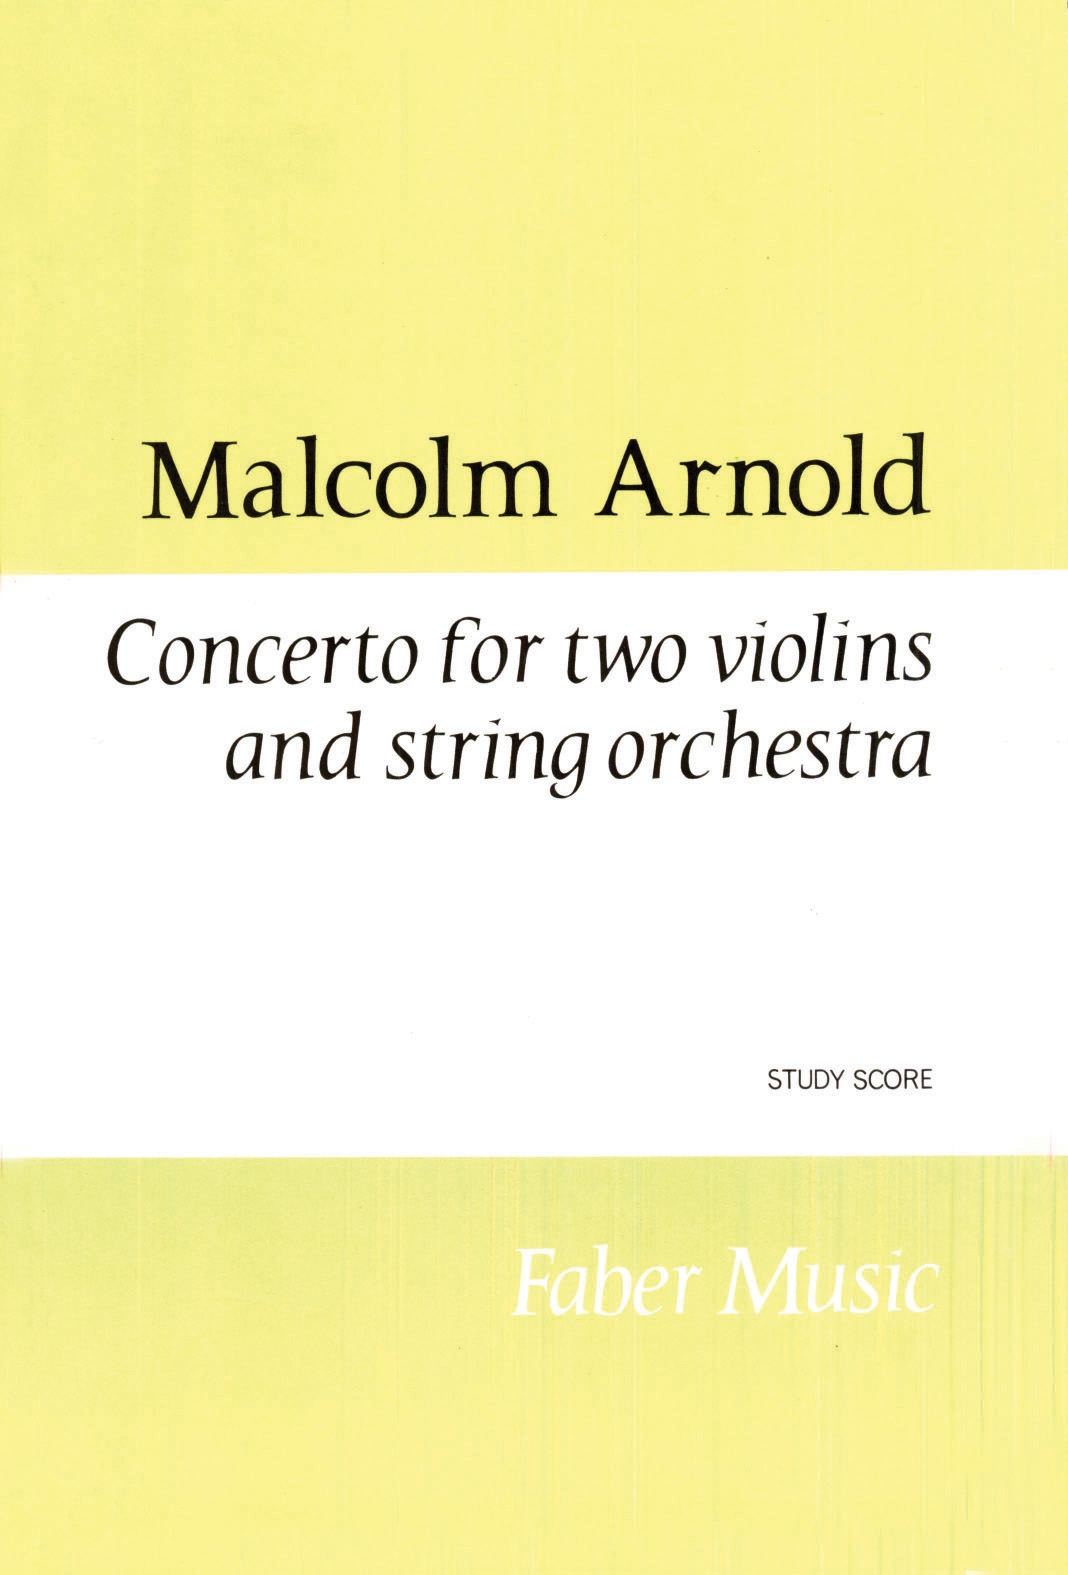 Malcolm Arnold: Concerto For Two Violins